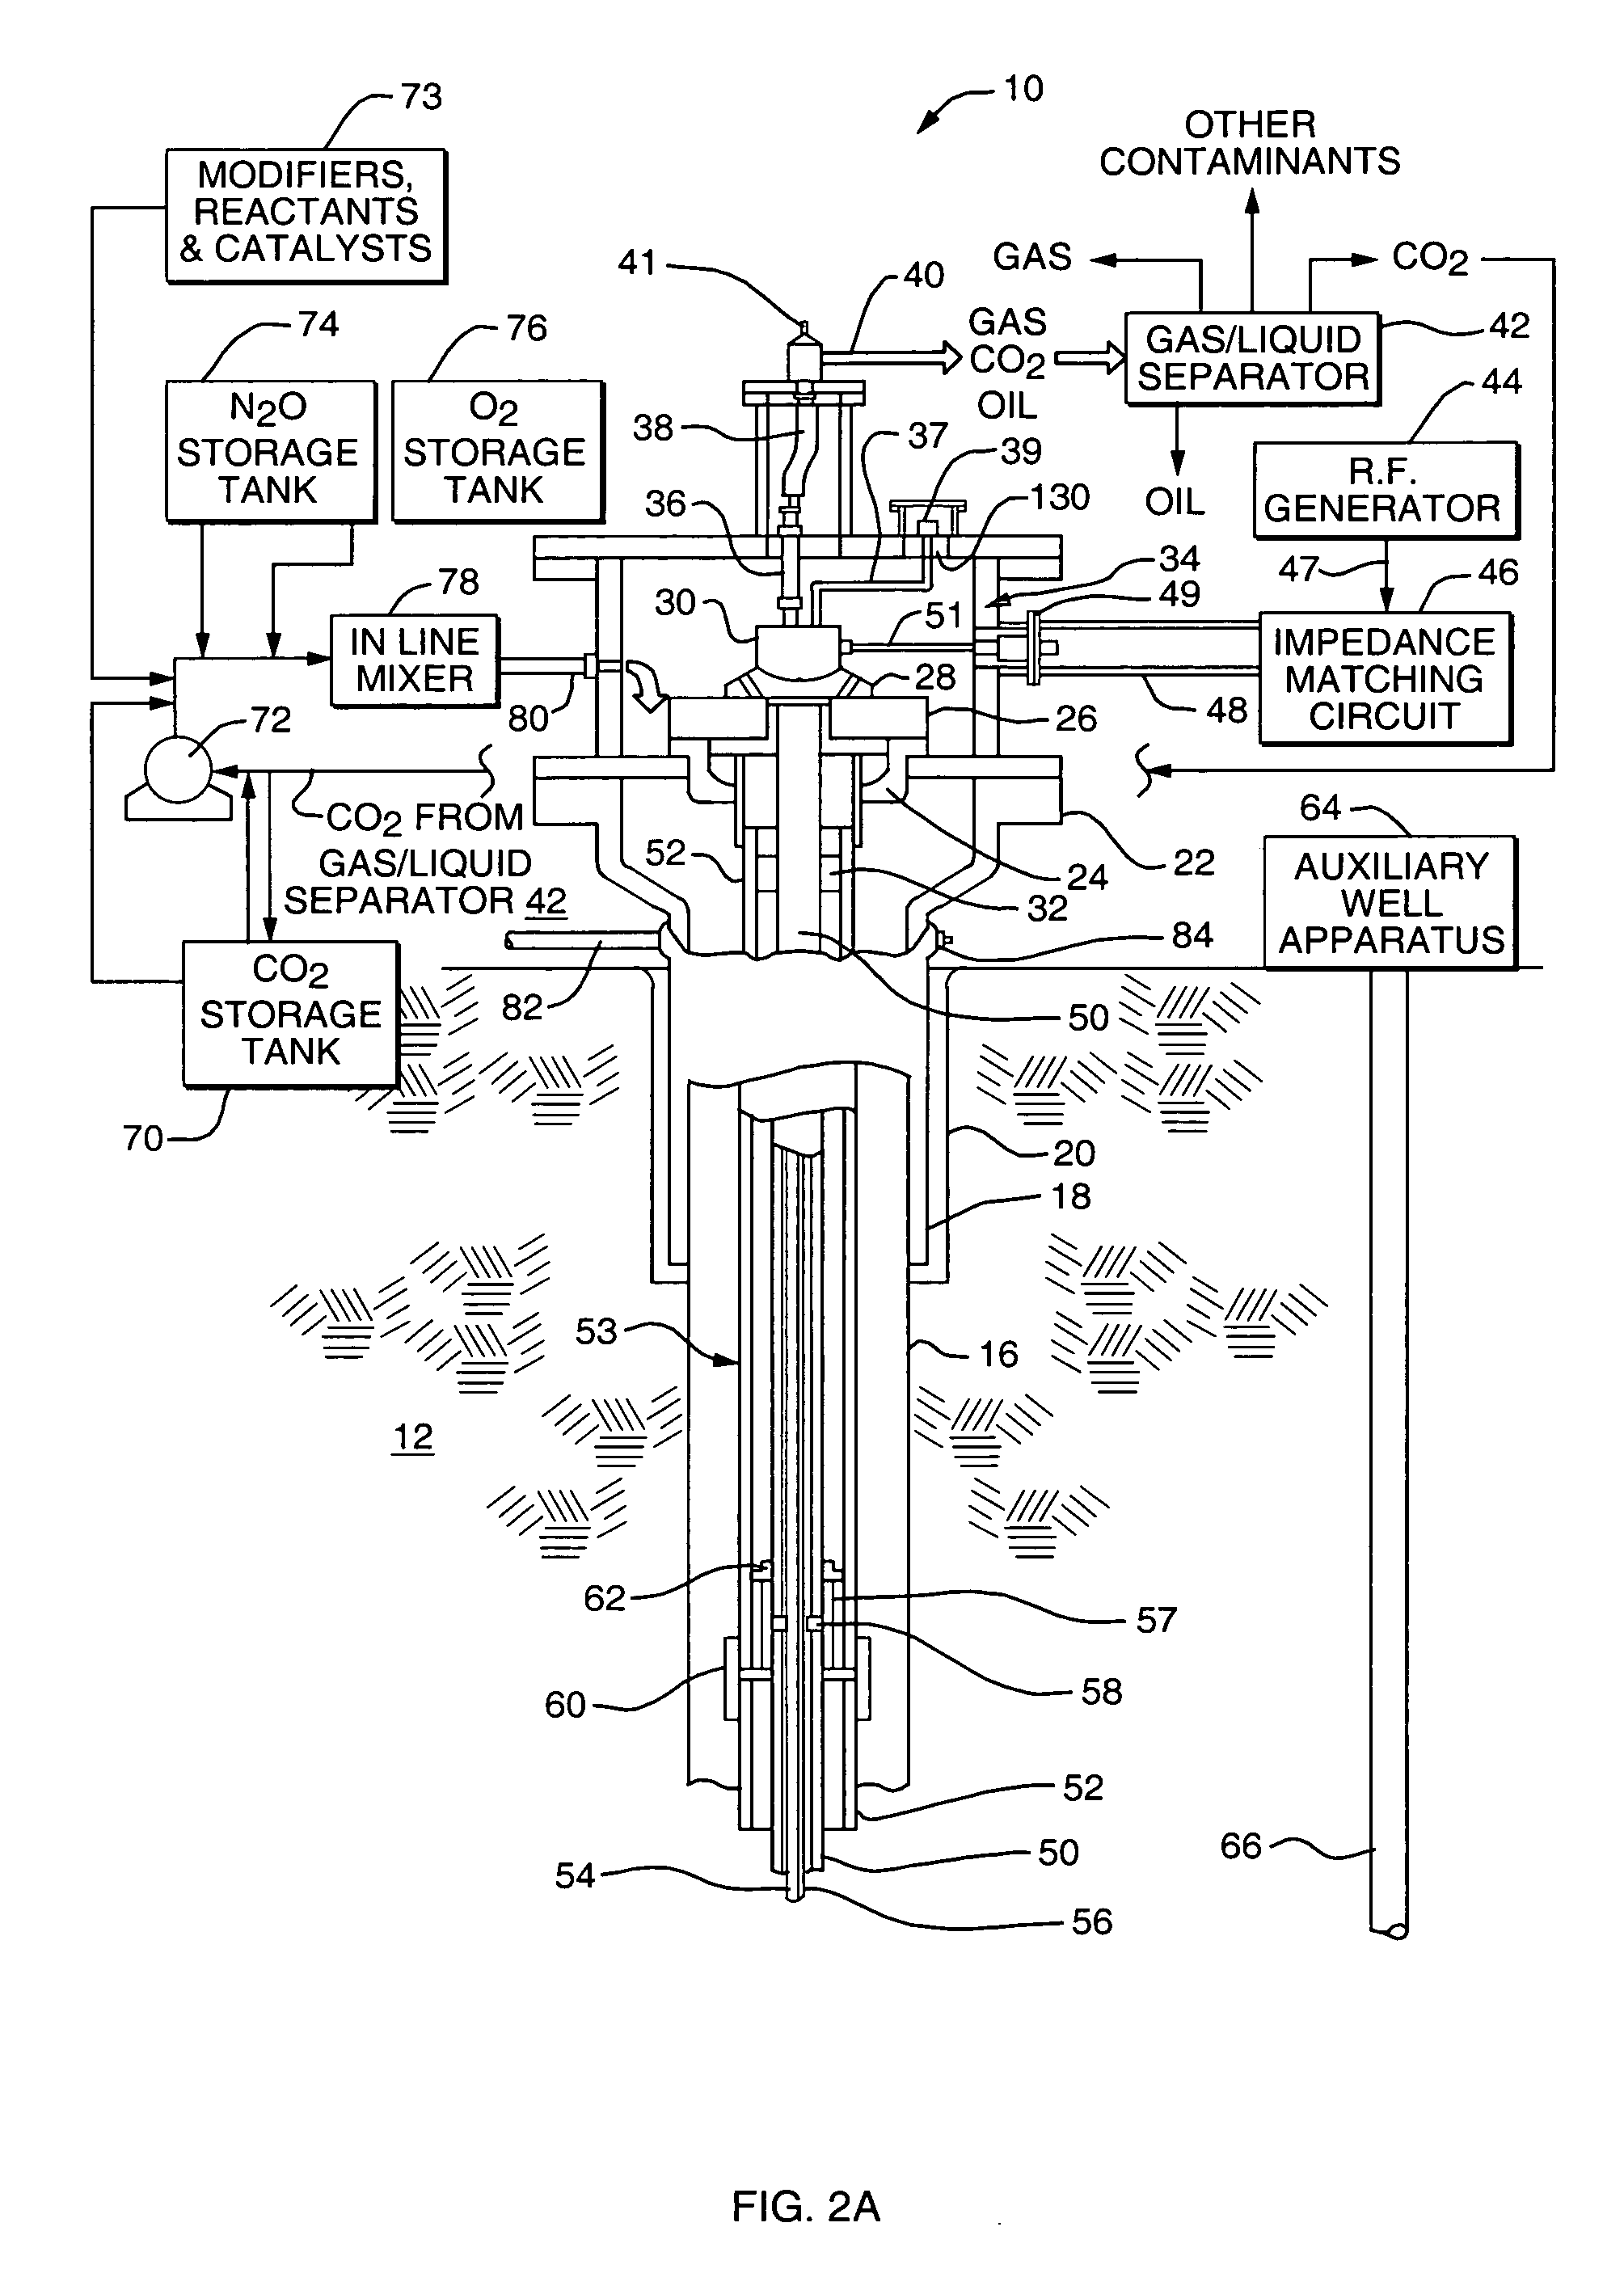 Apparatus for extraction of hydrocarbon fuels or contaminants using electrical energy and critical fluids